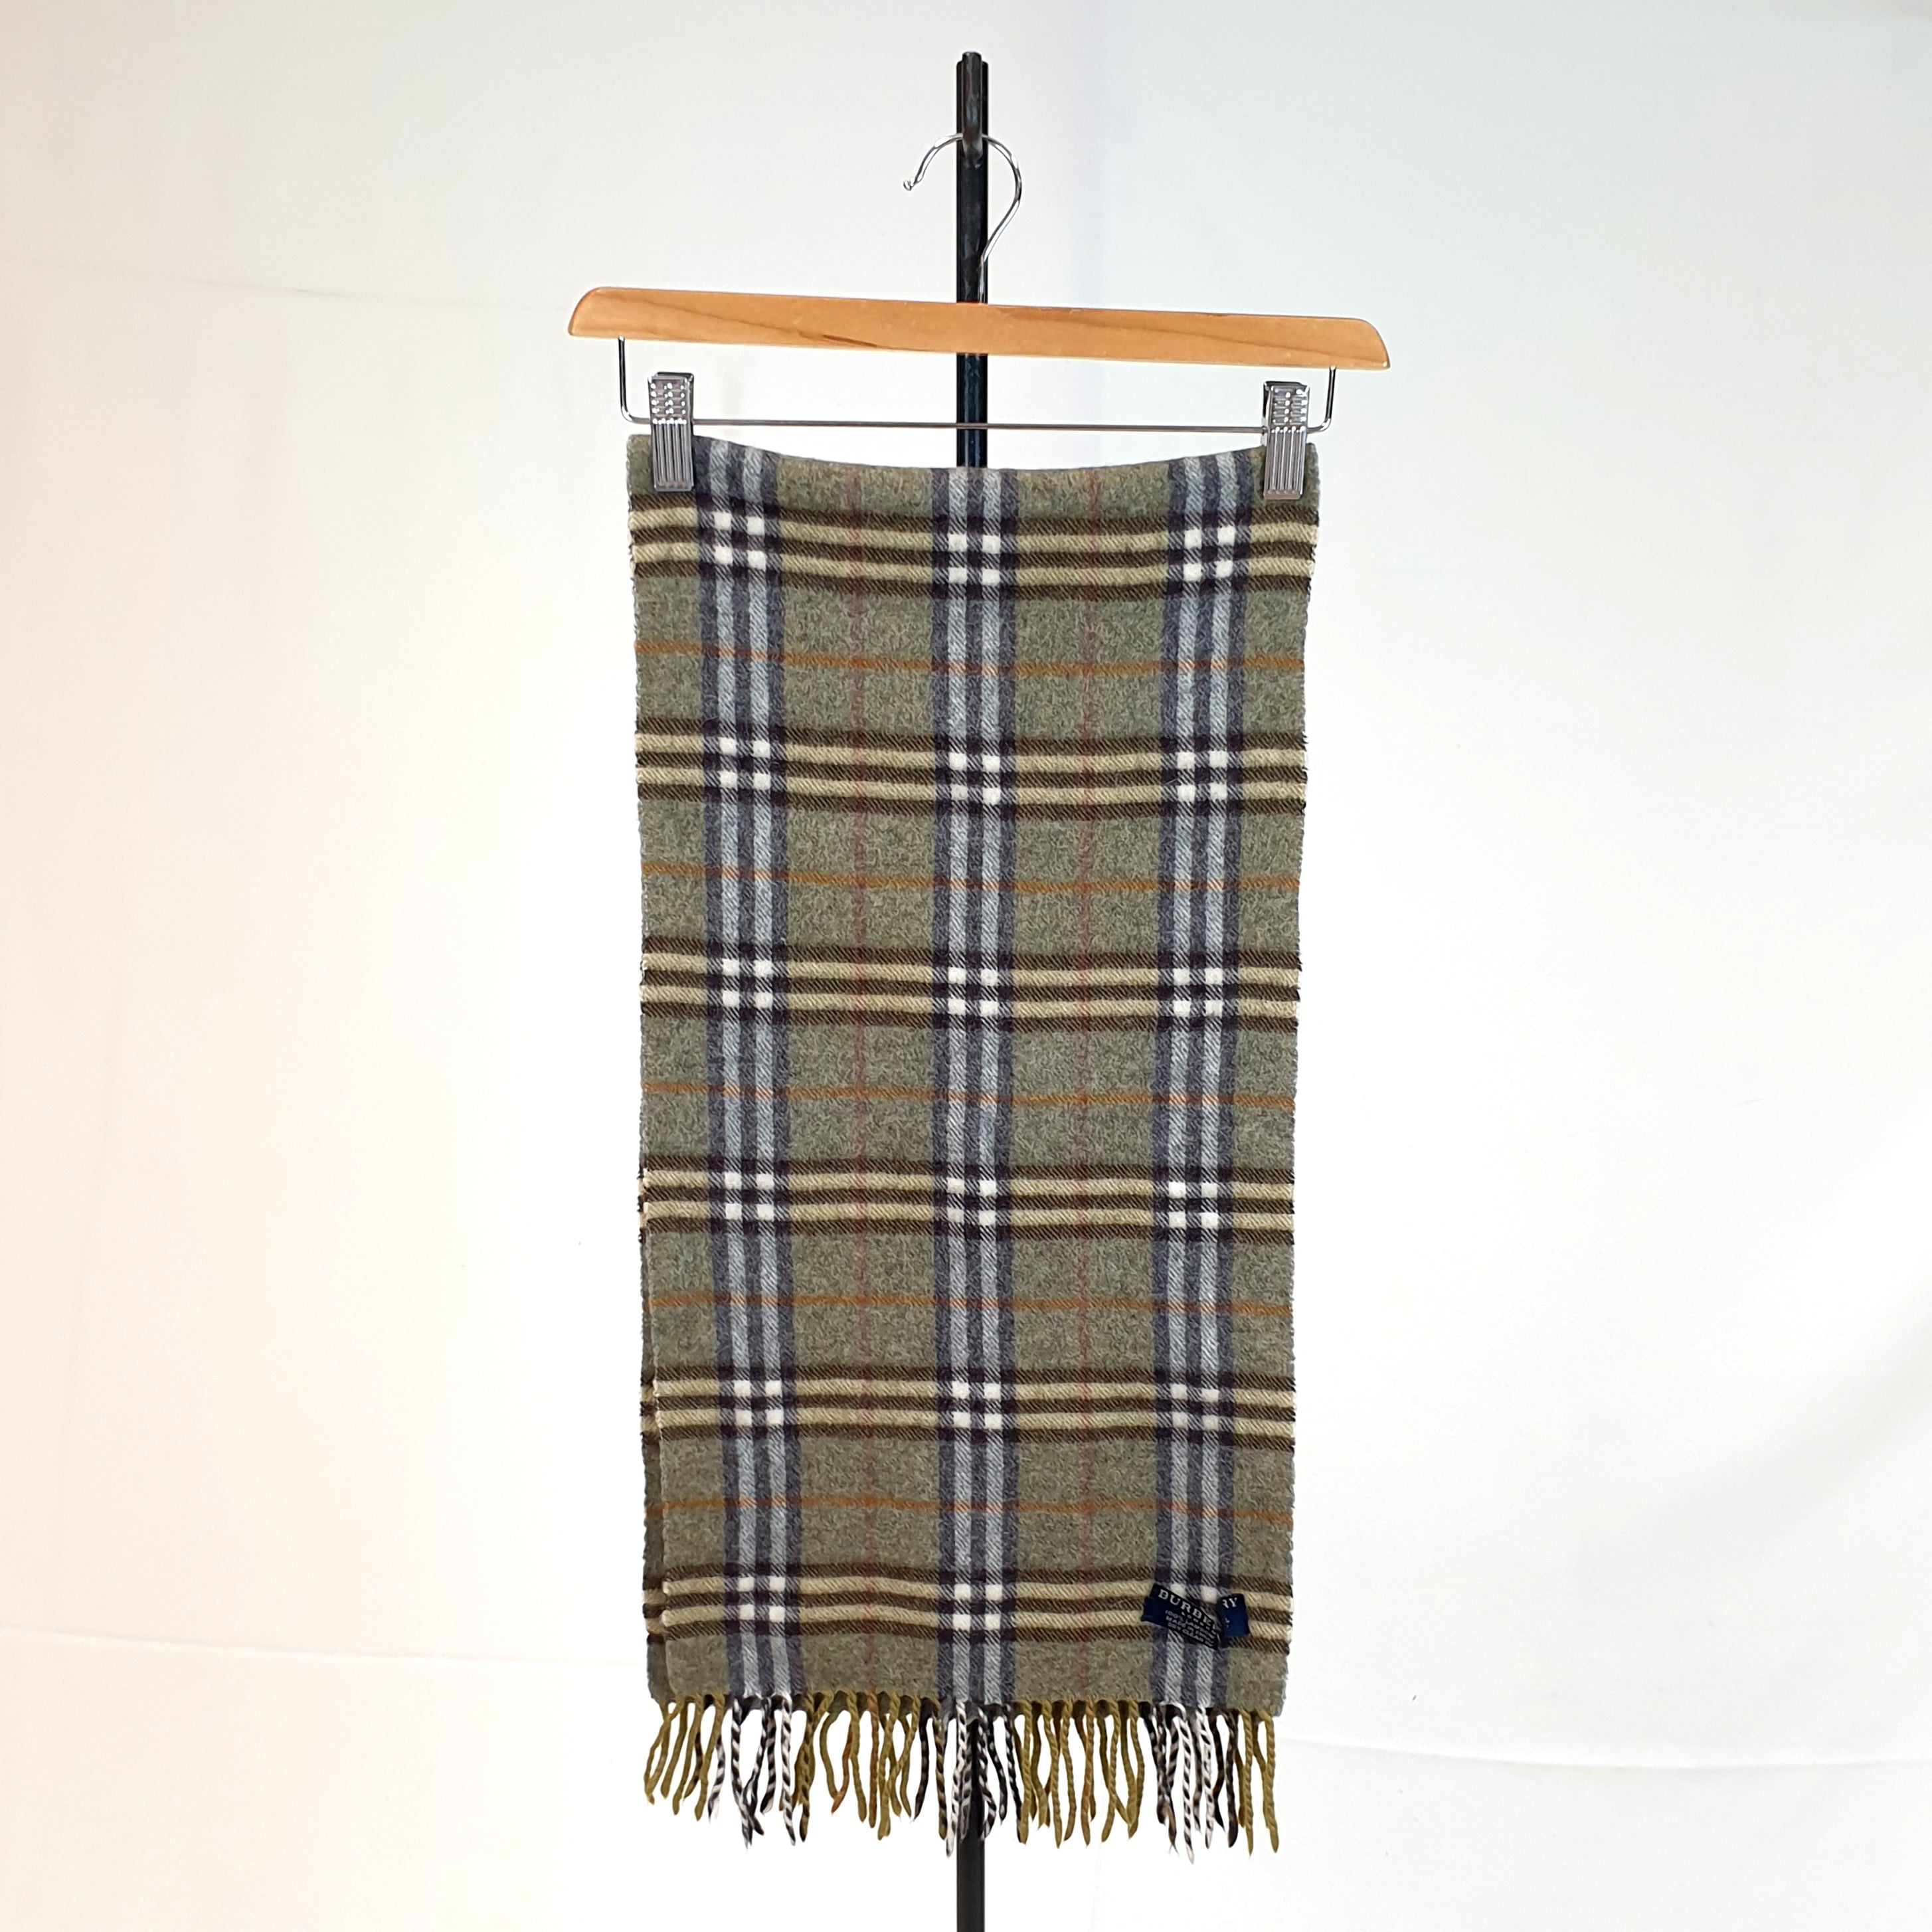 Burberry 100% Lambswool Scarf